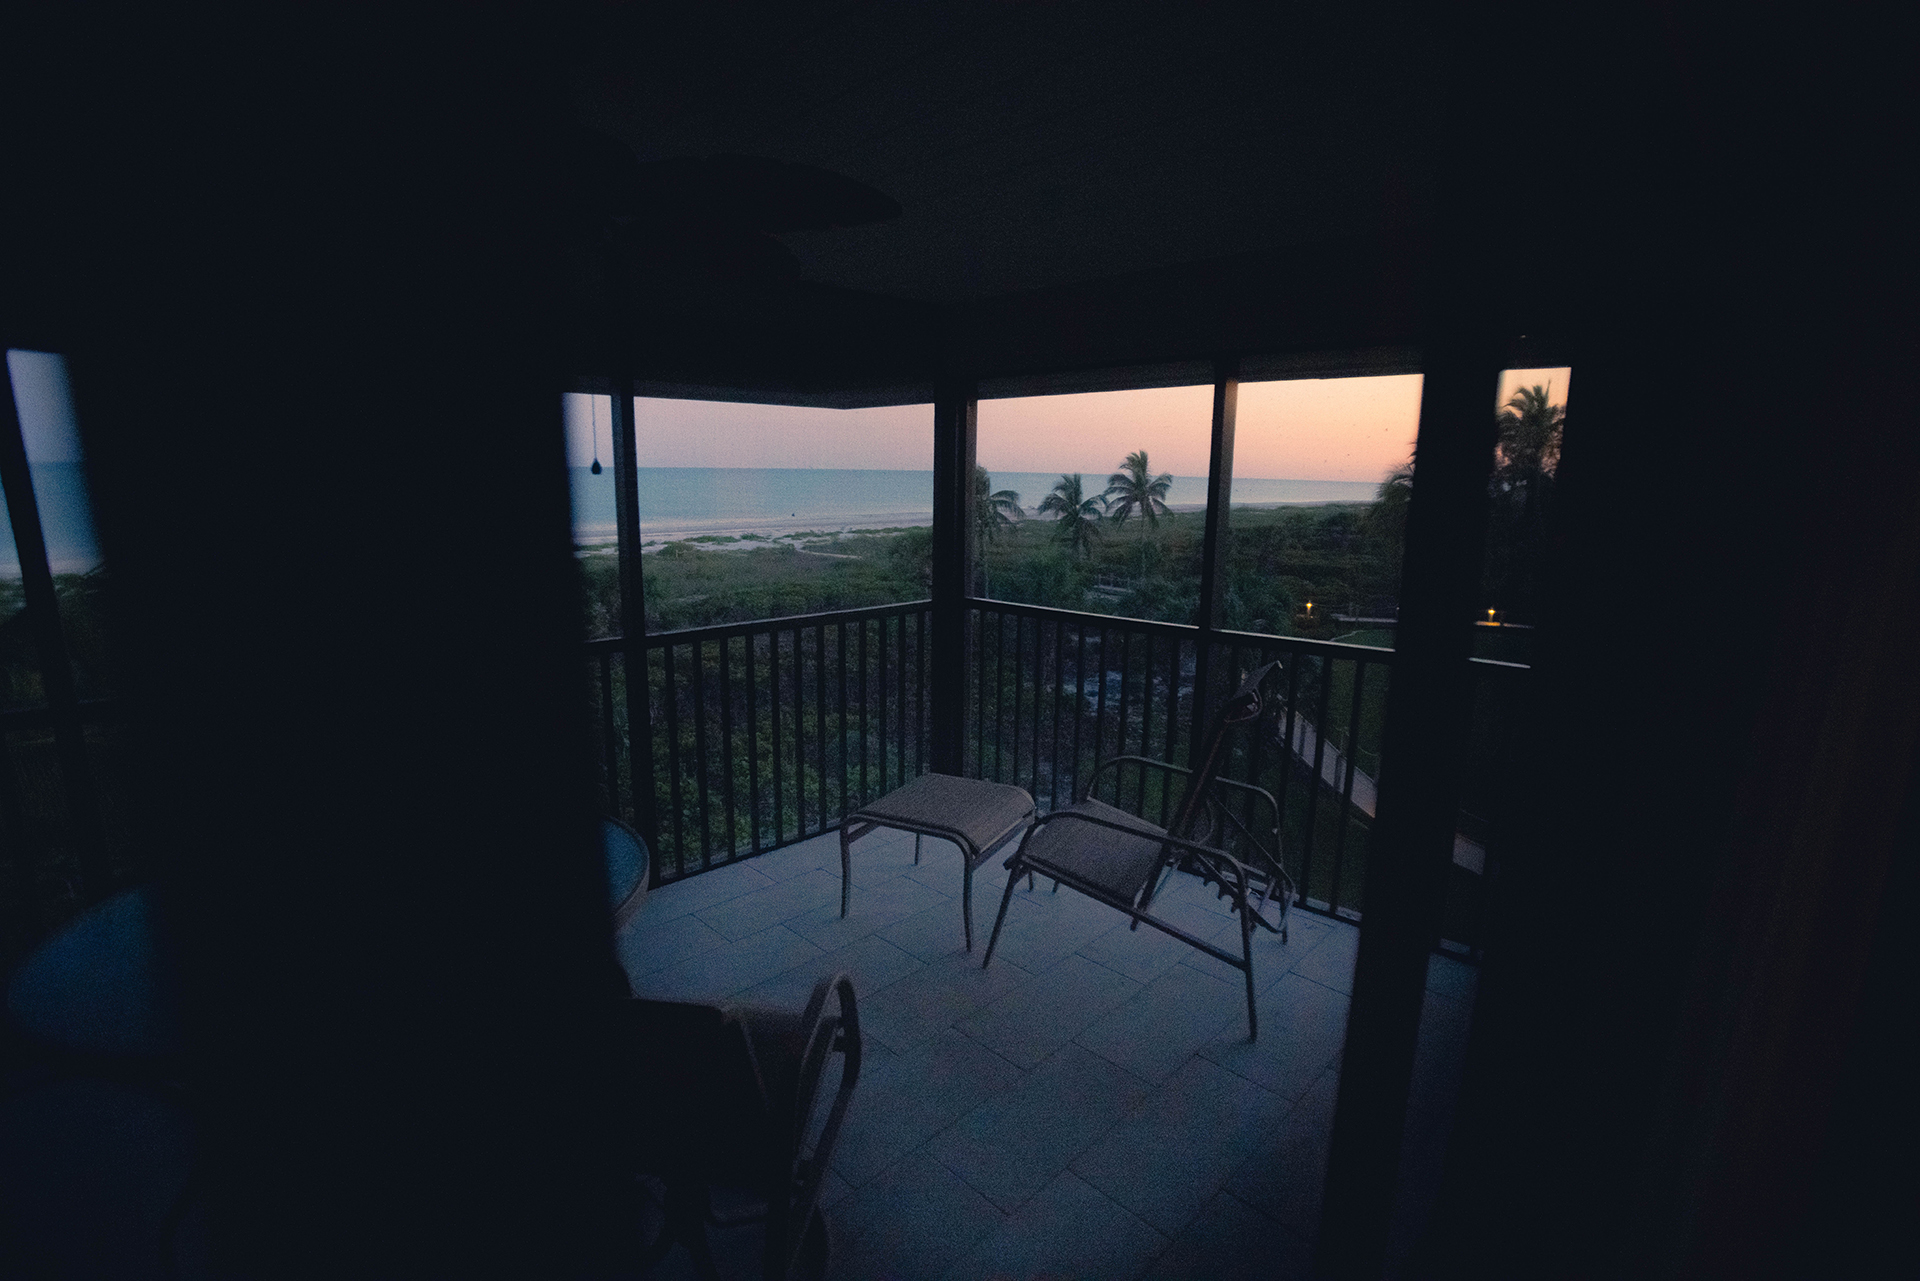 A porch facing the ocean during a sunset